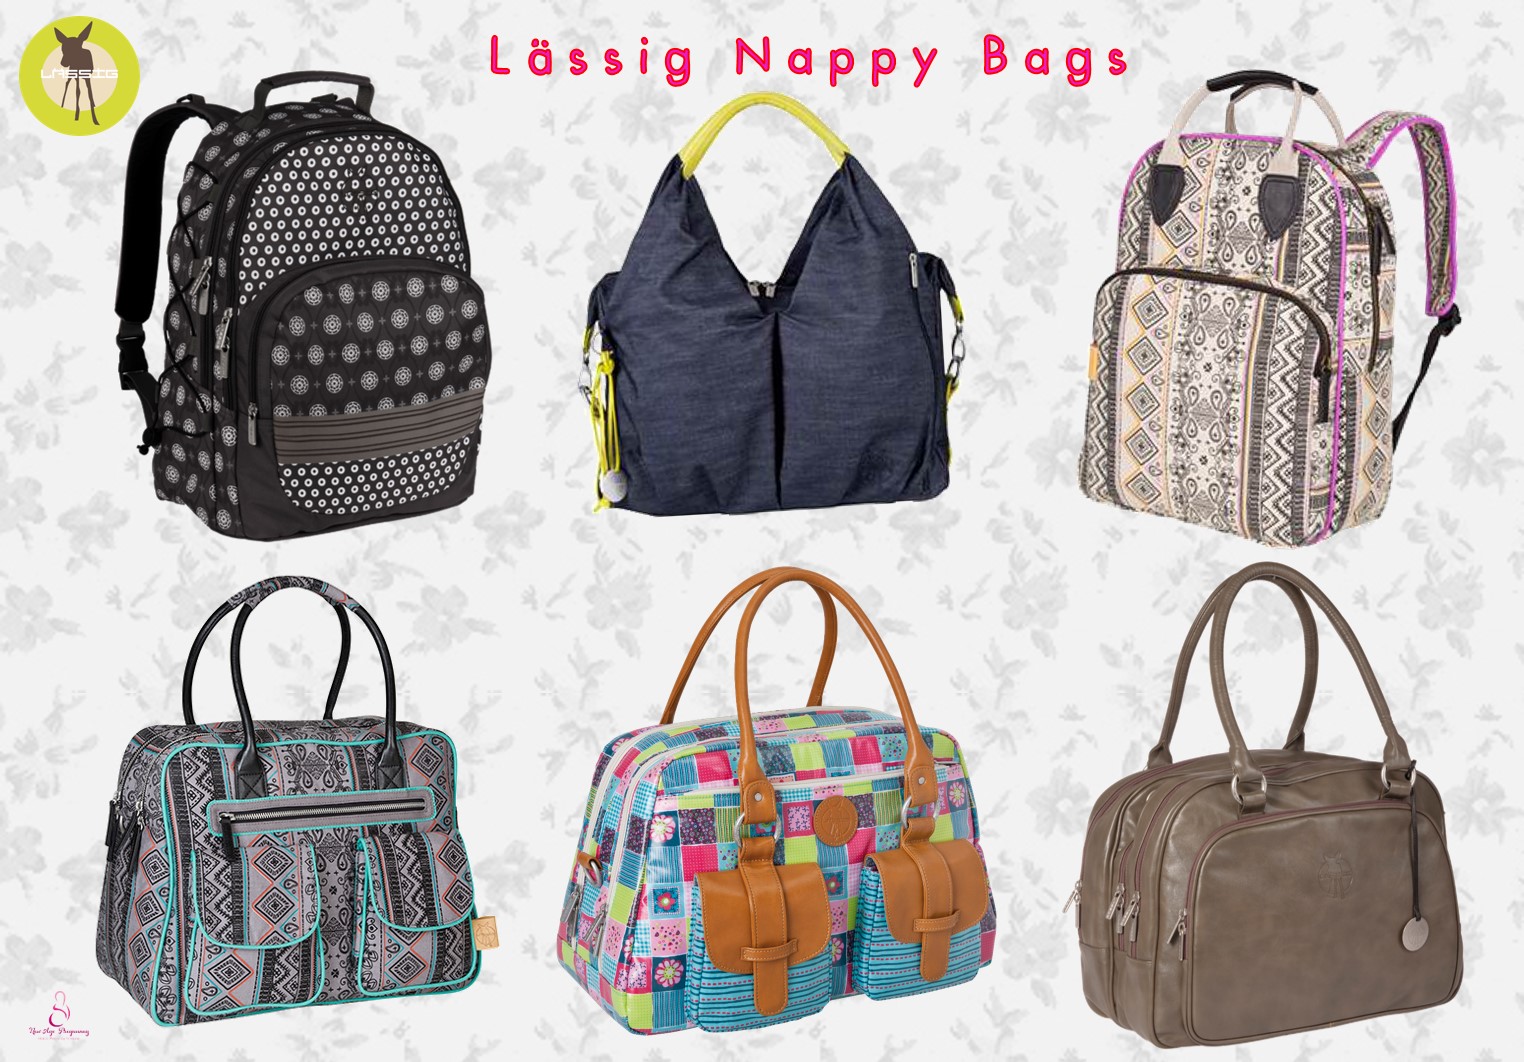 Lässig Nappy Bags Giveaway